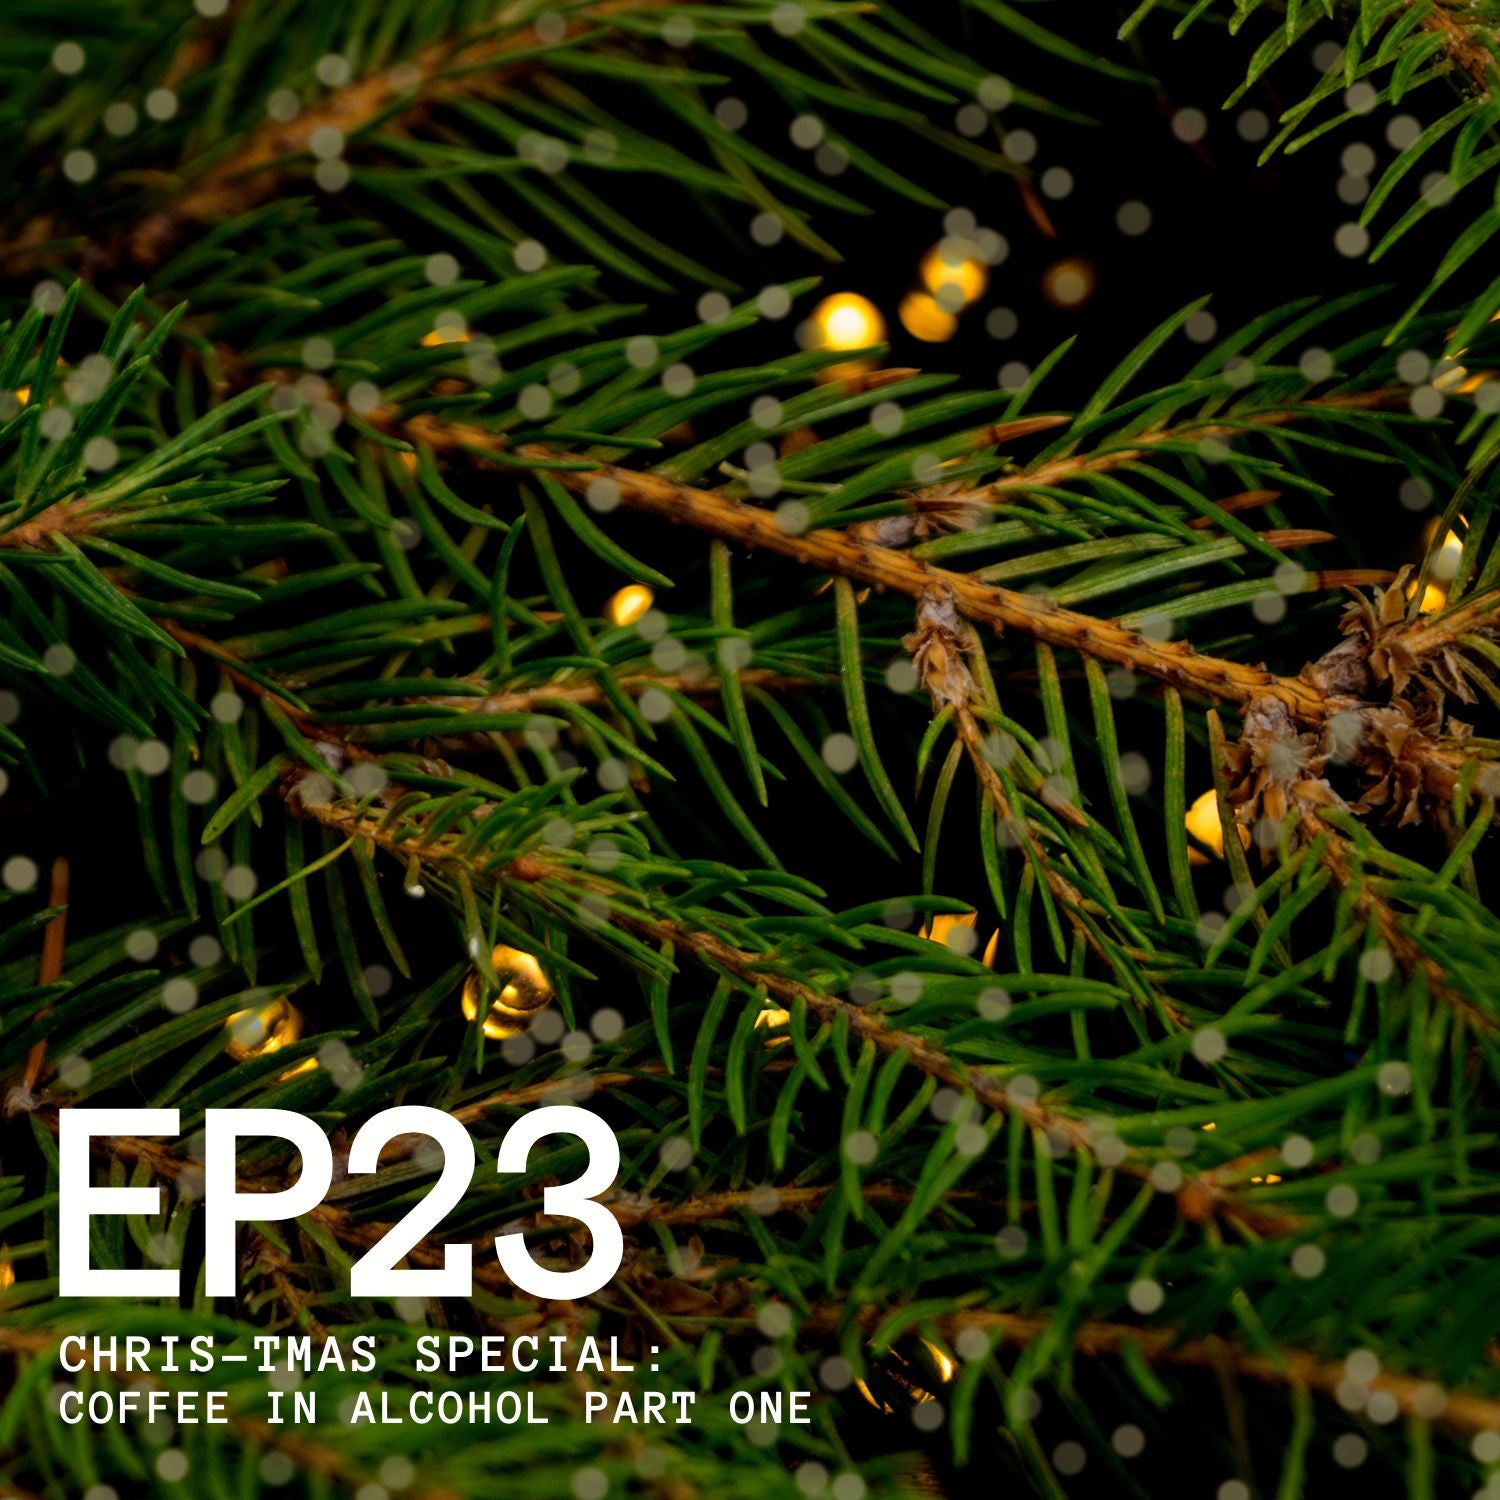 Episode 23- Chris-tmas Special: Coffee in Alcohol Part 1